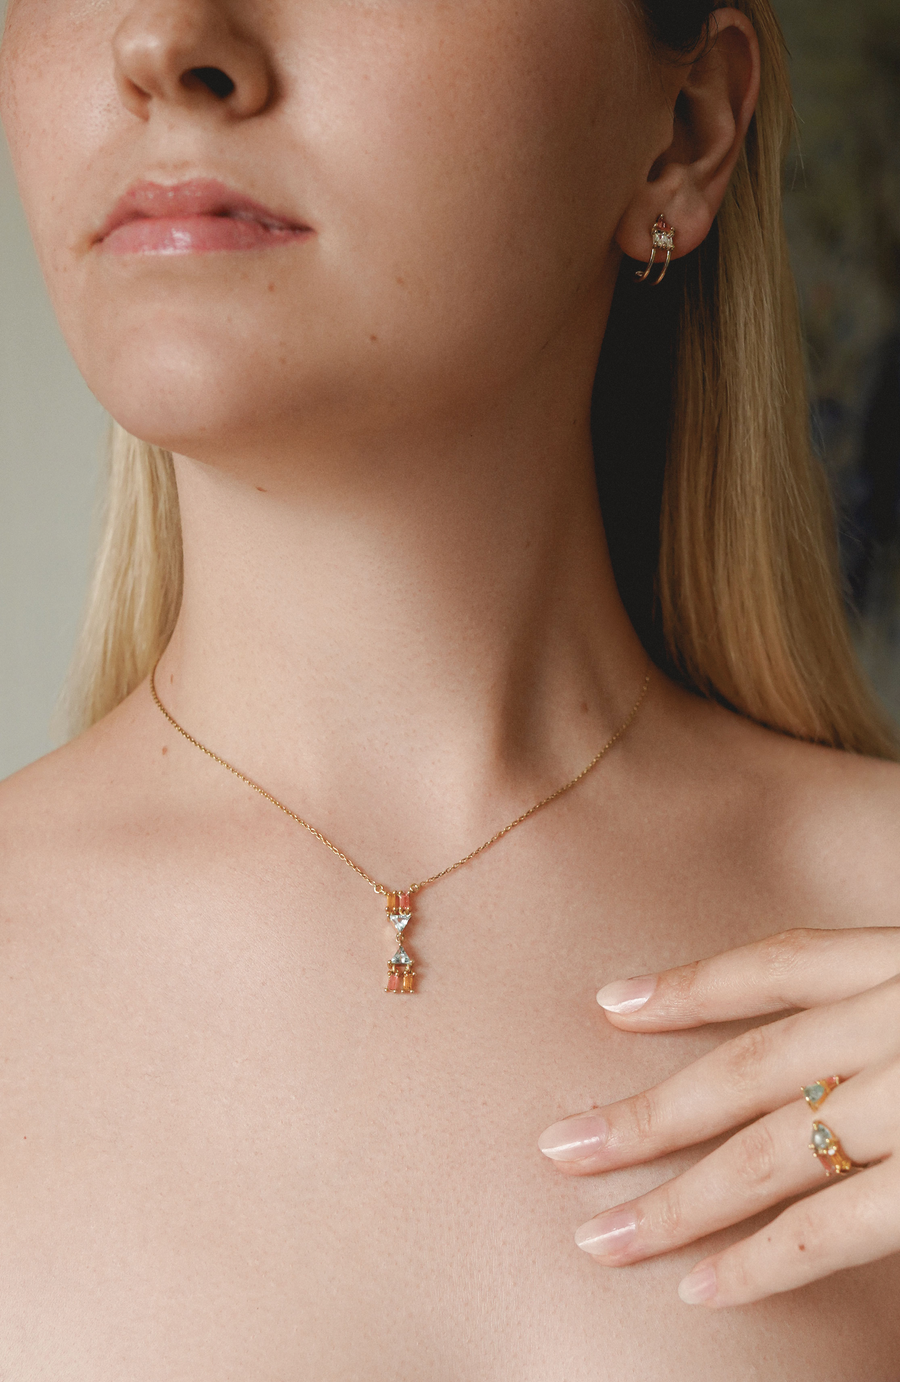 on body of Atlante Gold Necklace Featuring 2 opal triangle stones with 4 light pink tourmaline baguettes 